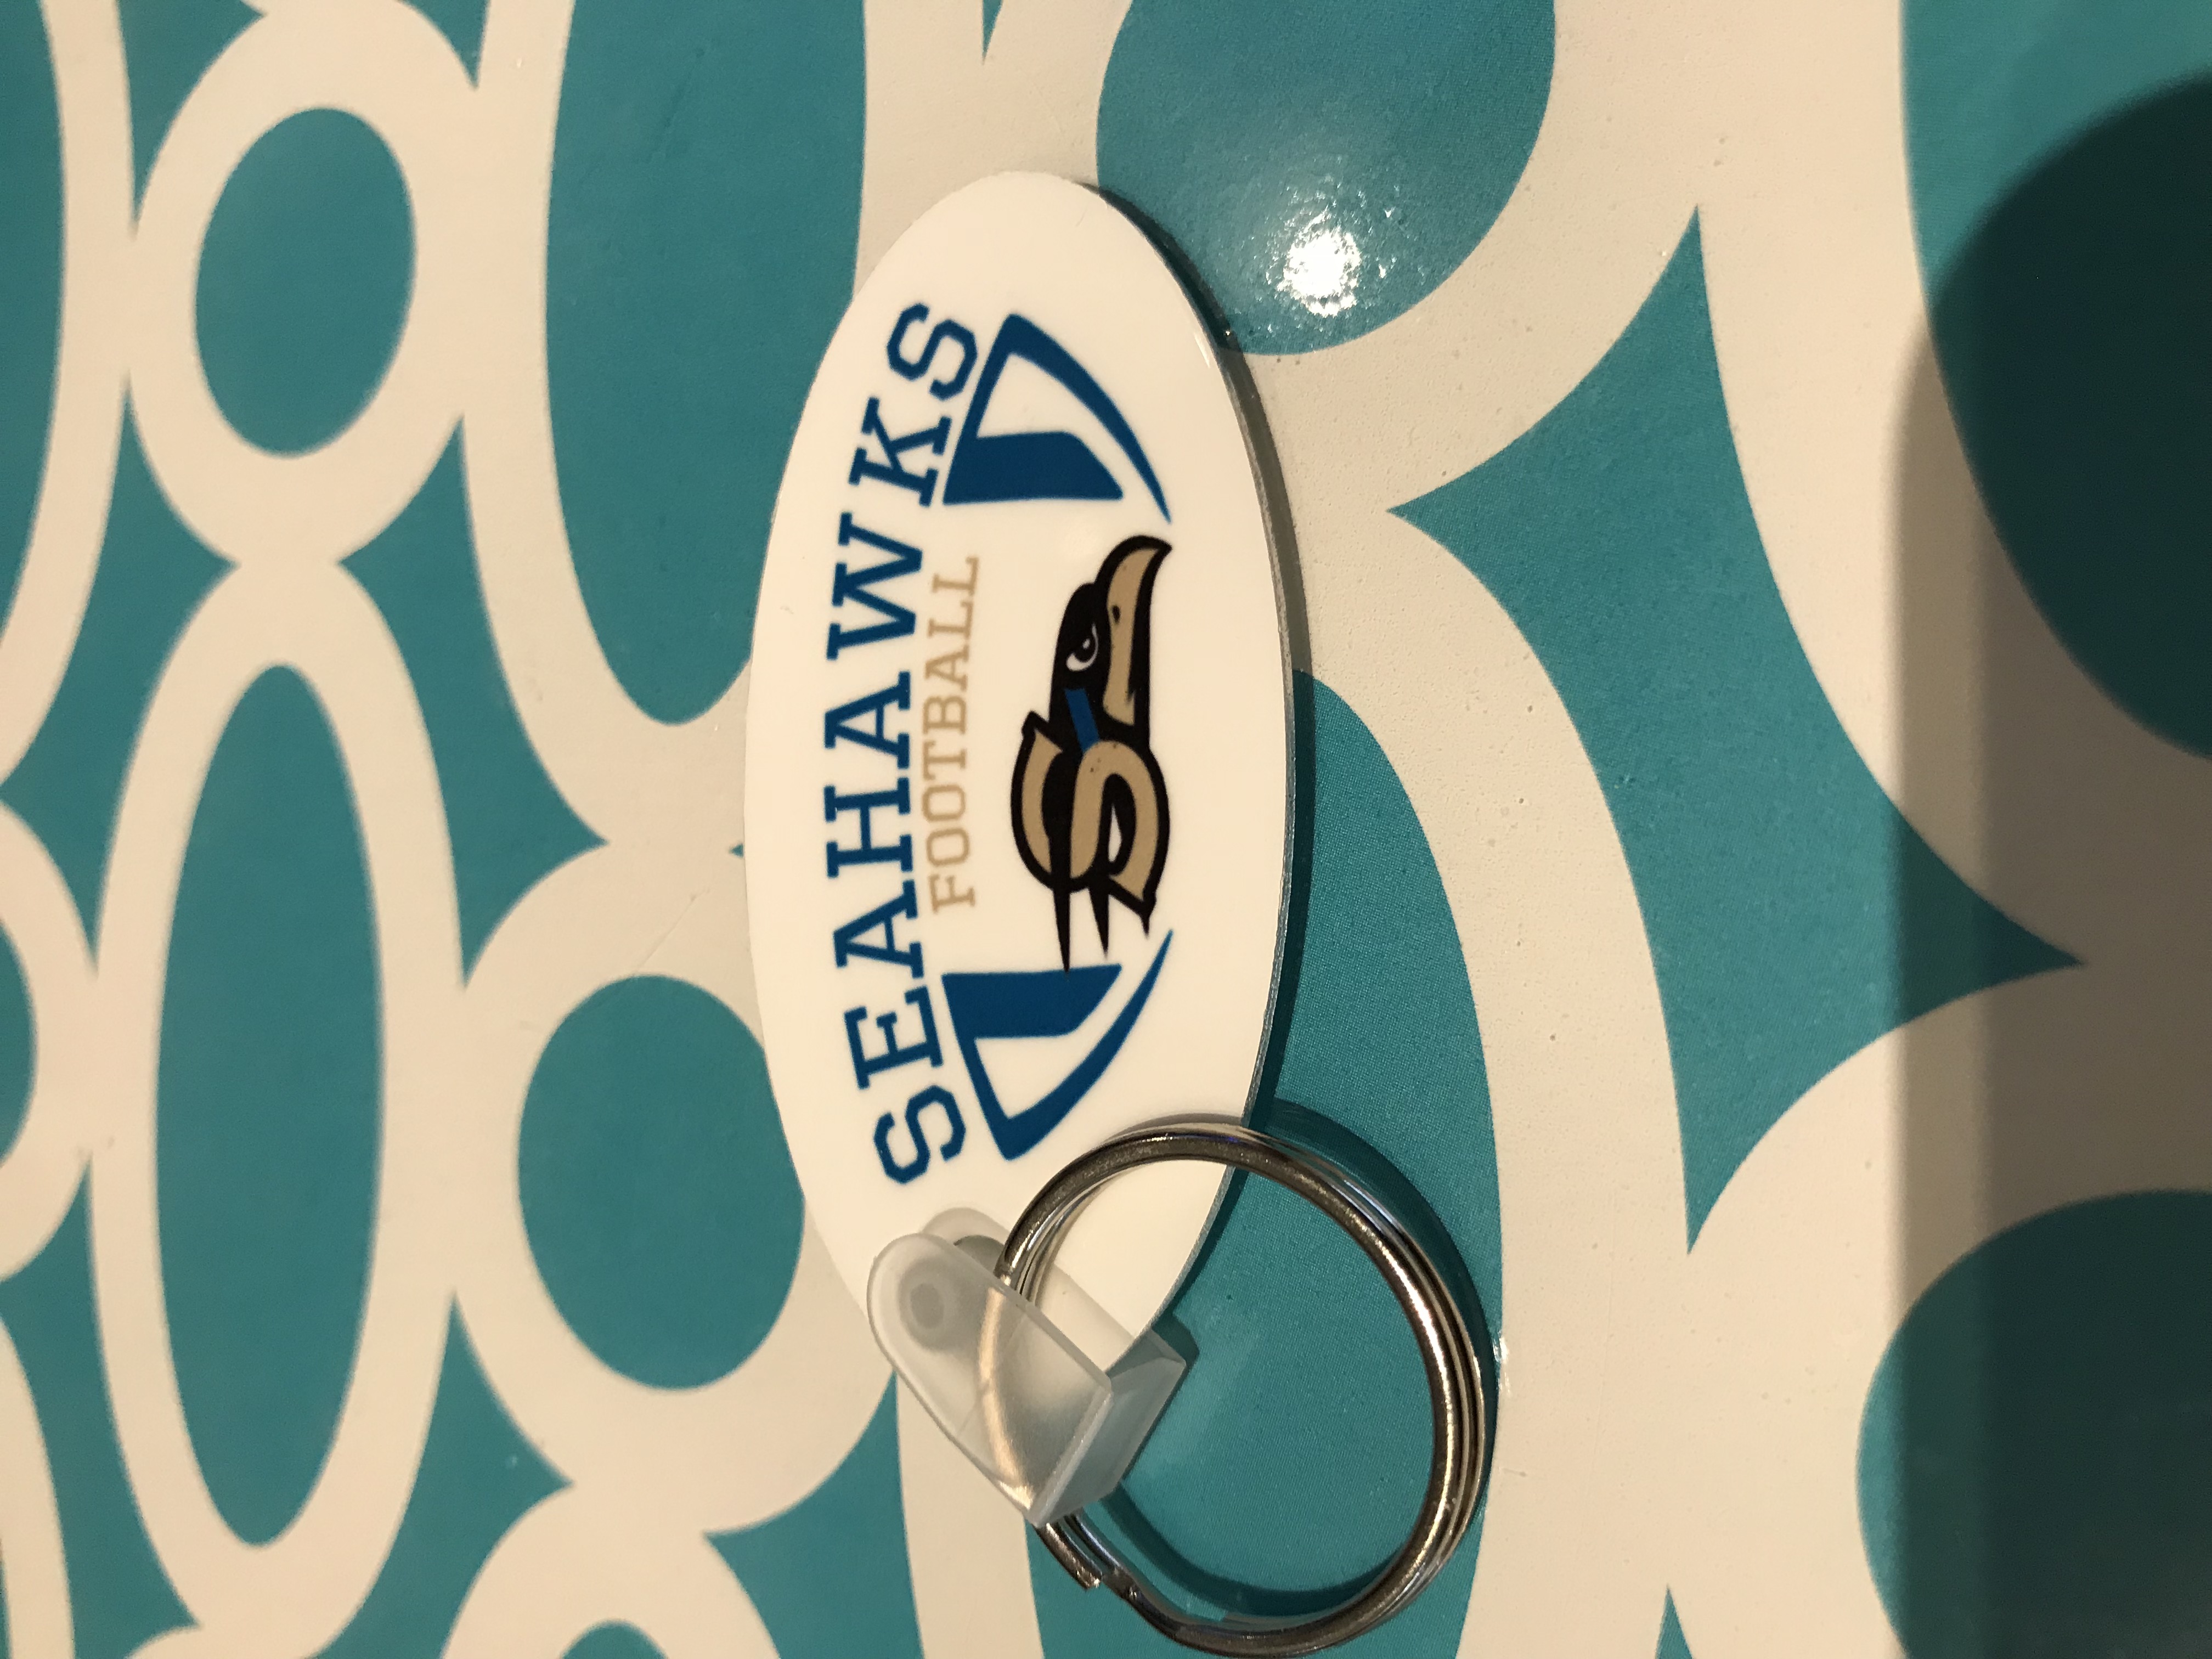 Keychain made with sublimation printing